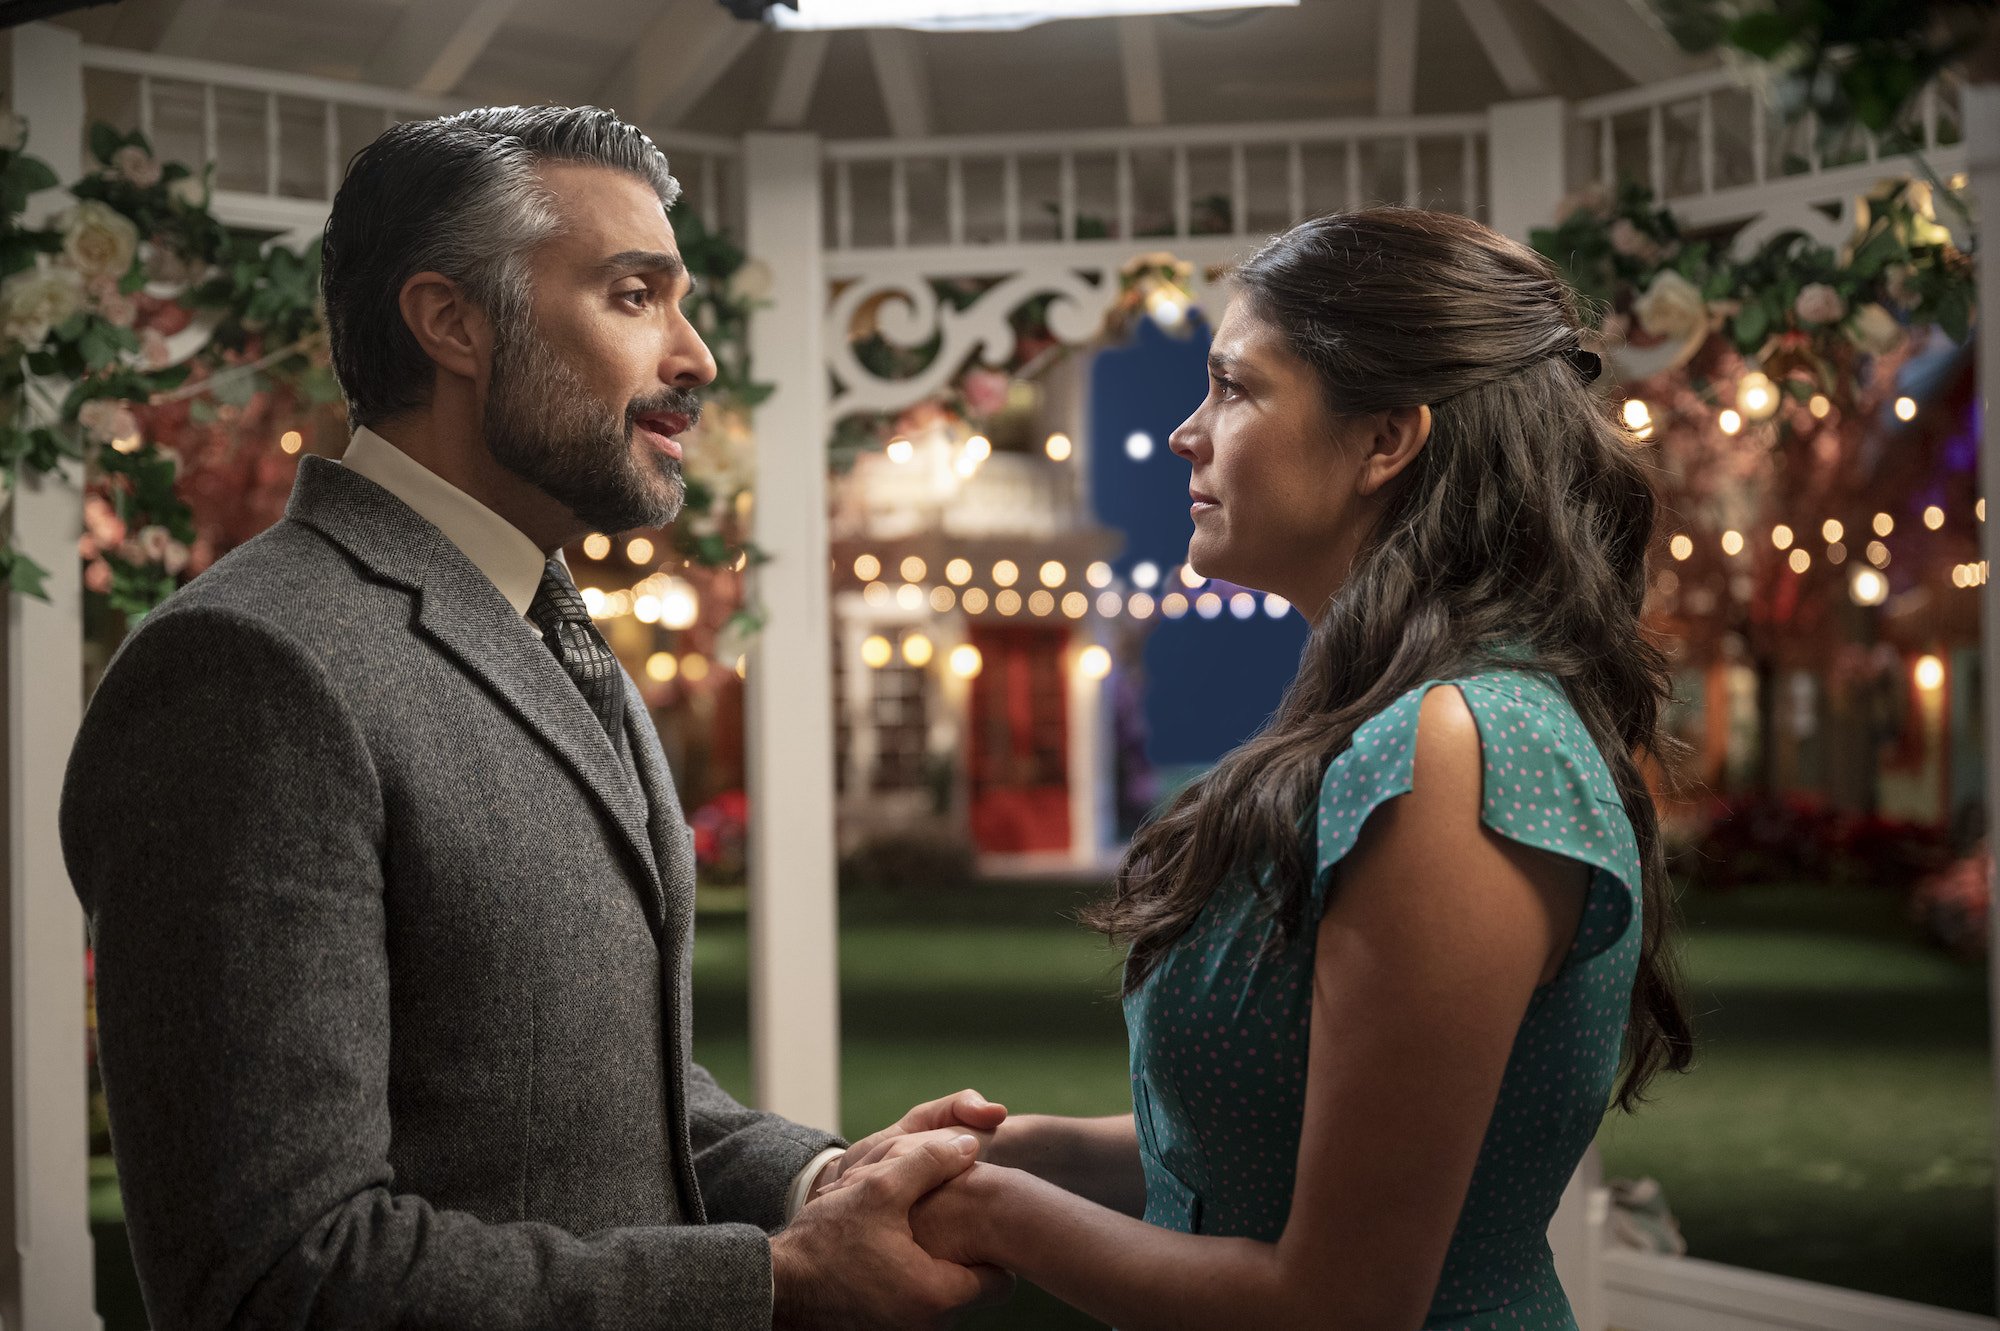 Jaime Camil holds Cecily Strong's hand